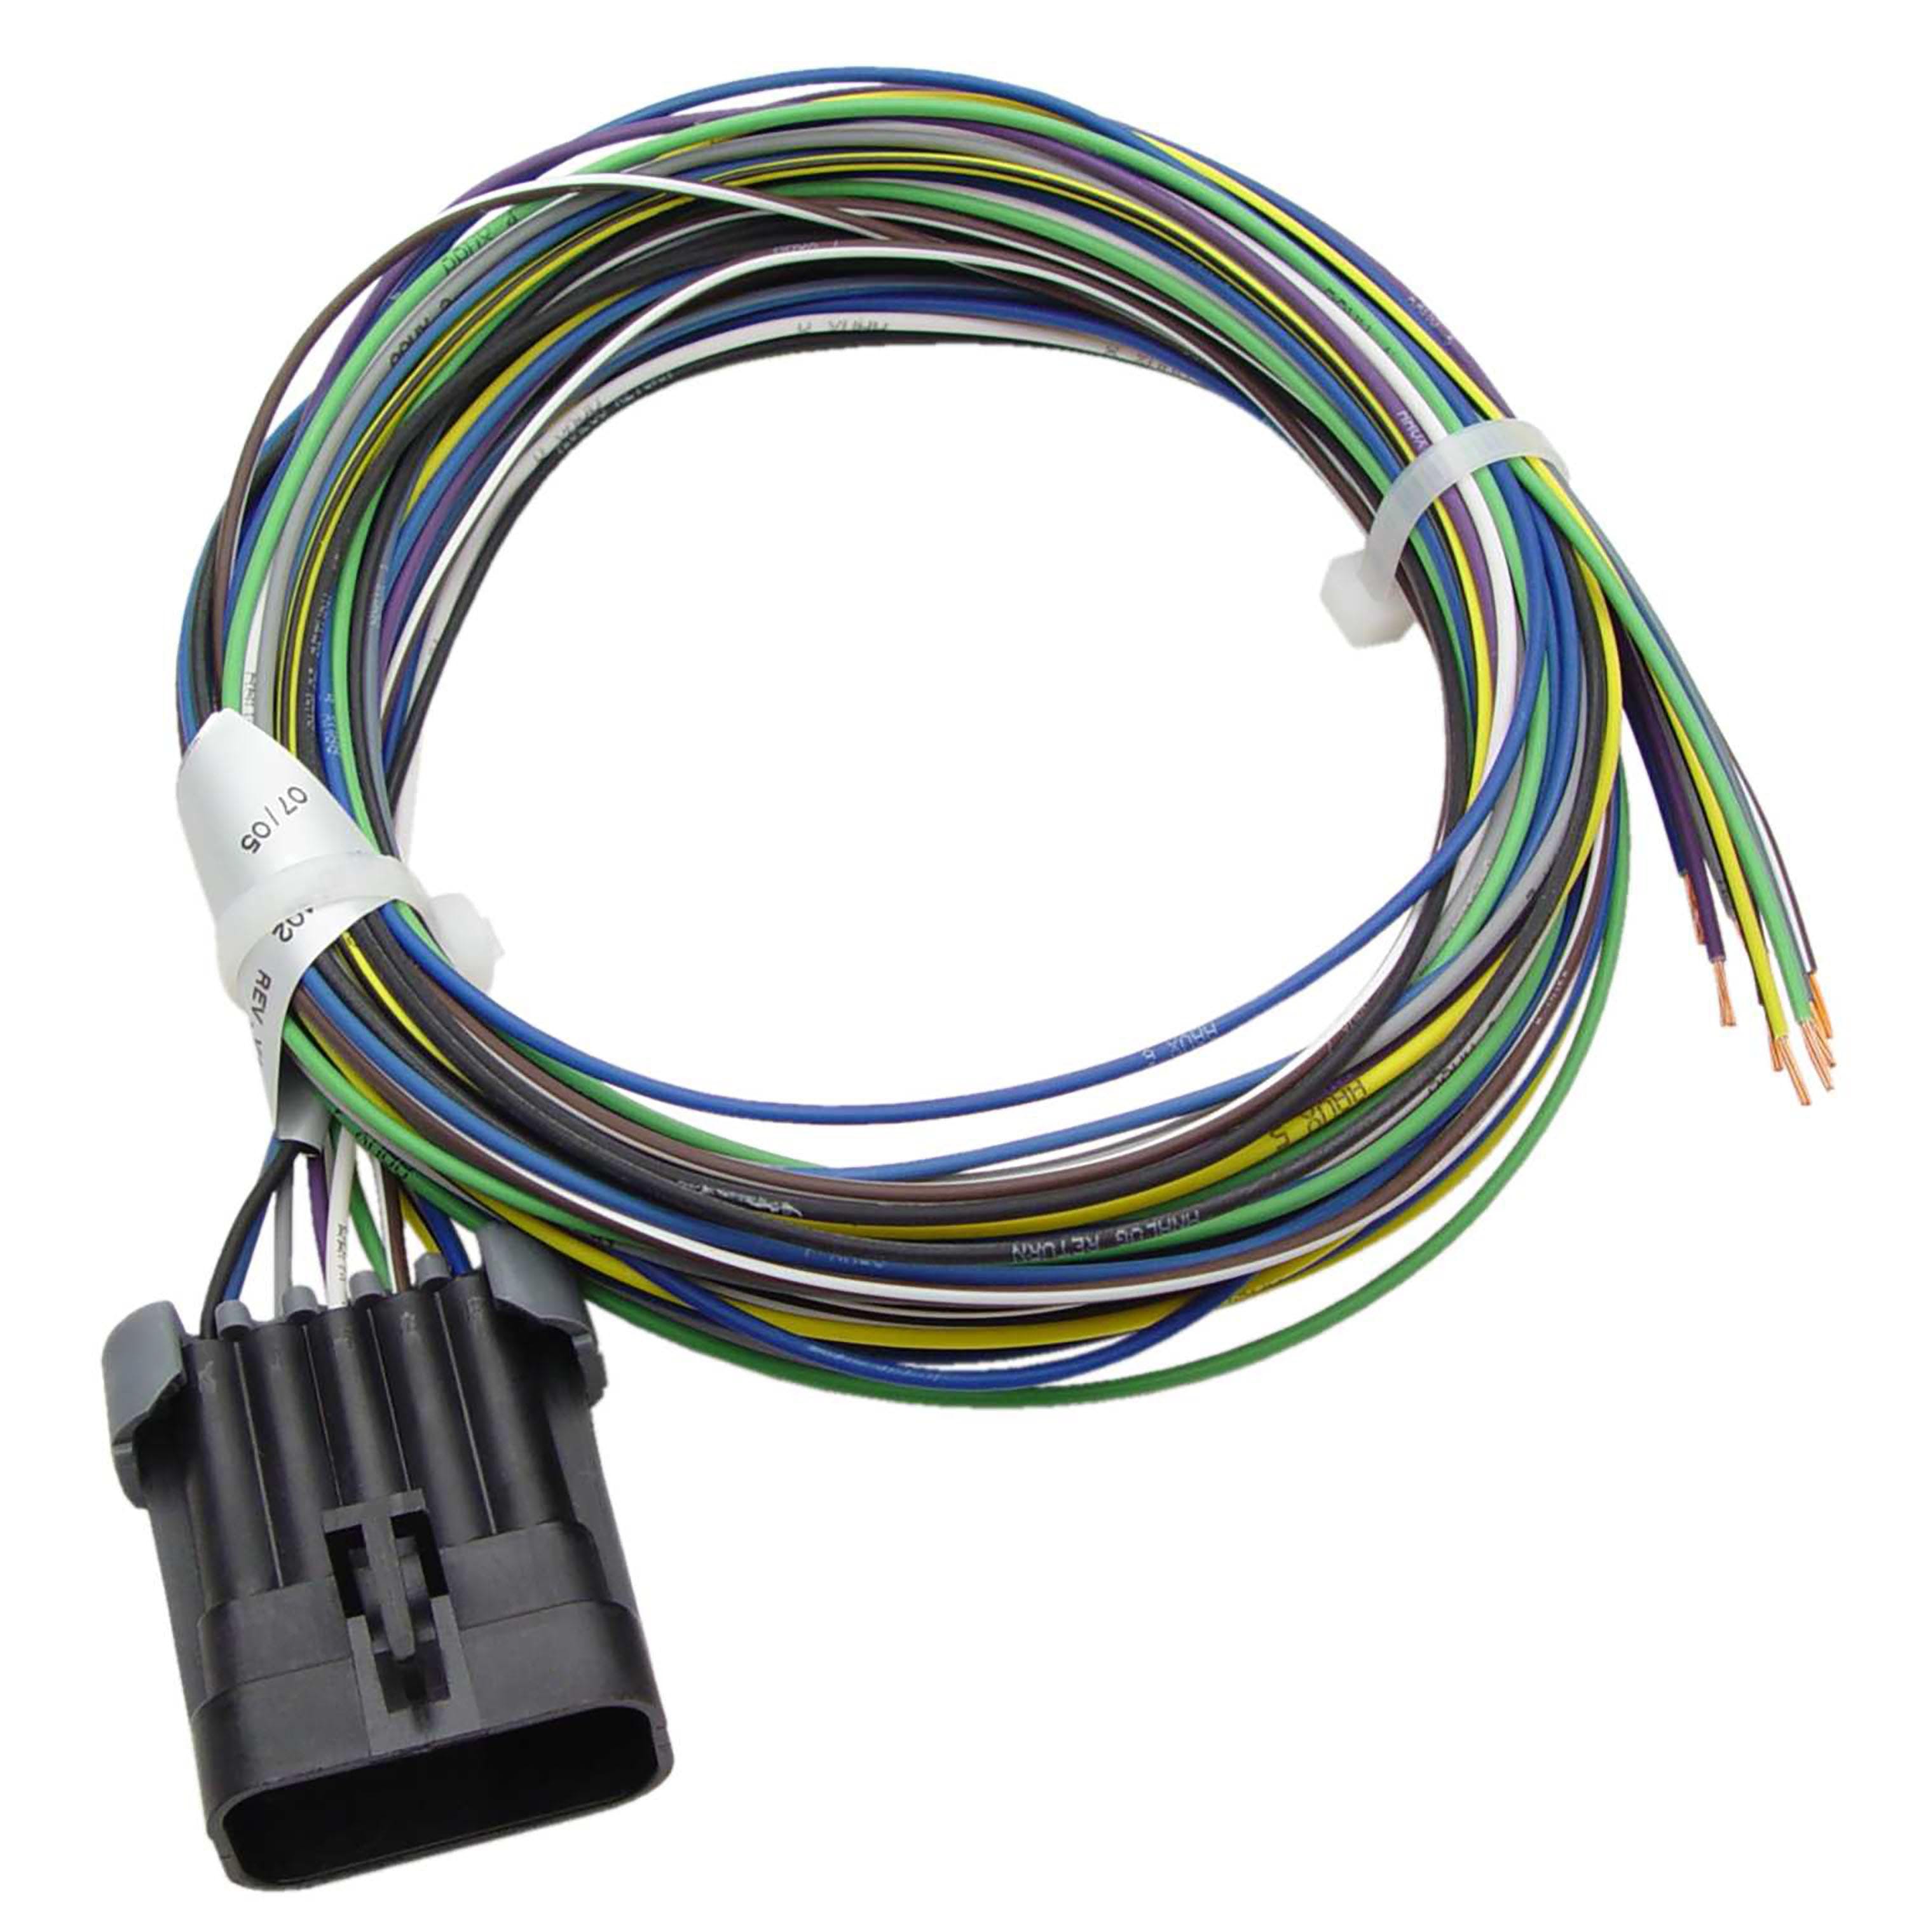 FAST - Fuel Air Spark Technology 301402 Analog Input Harness for XFI